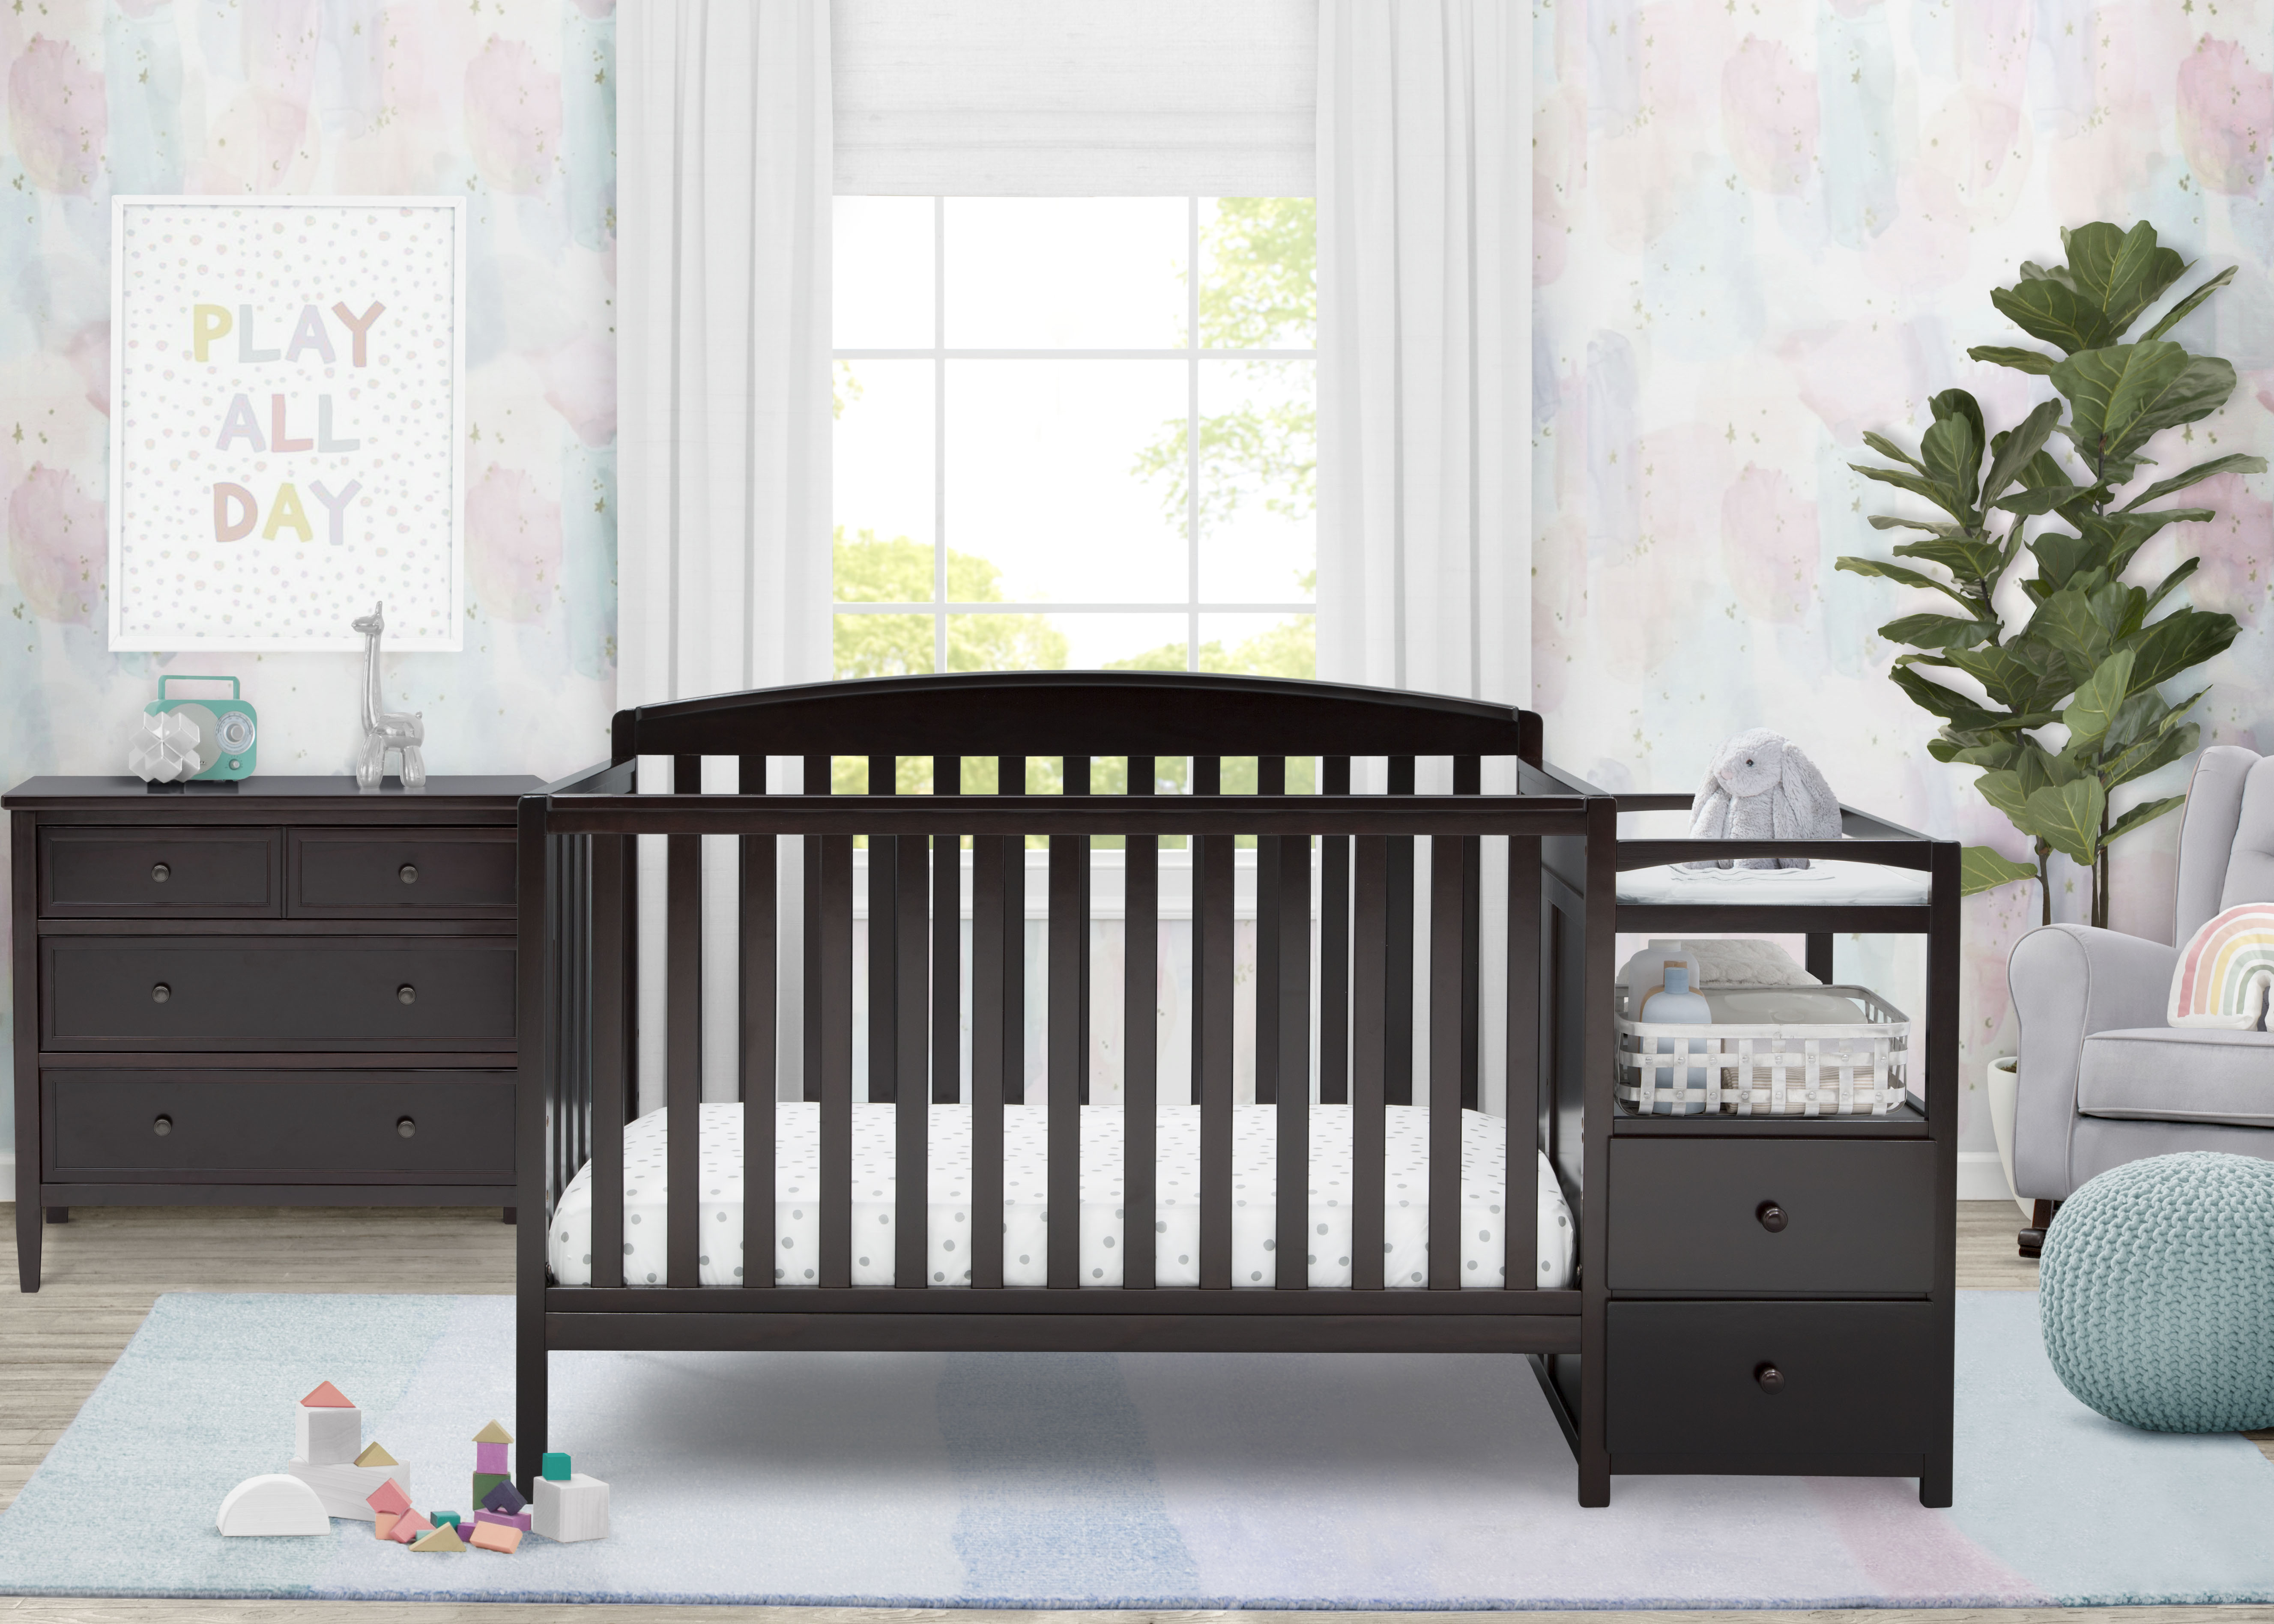 Delta Children Royal 4-in-1 Convertible Baby Crib and Changer, Dark Chocolate - image 4 of 10